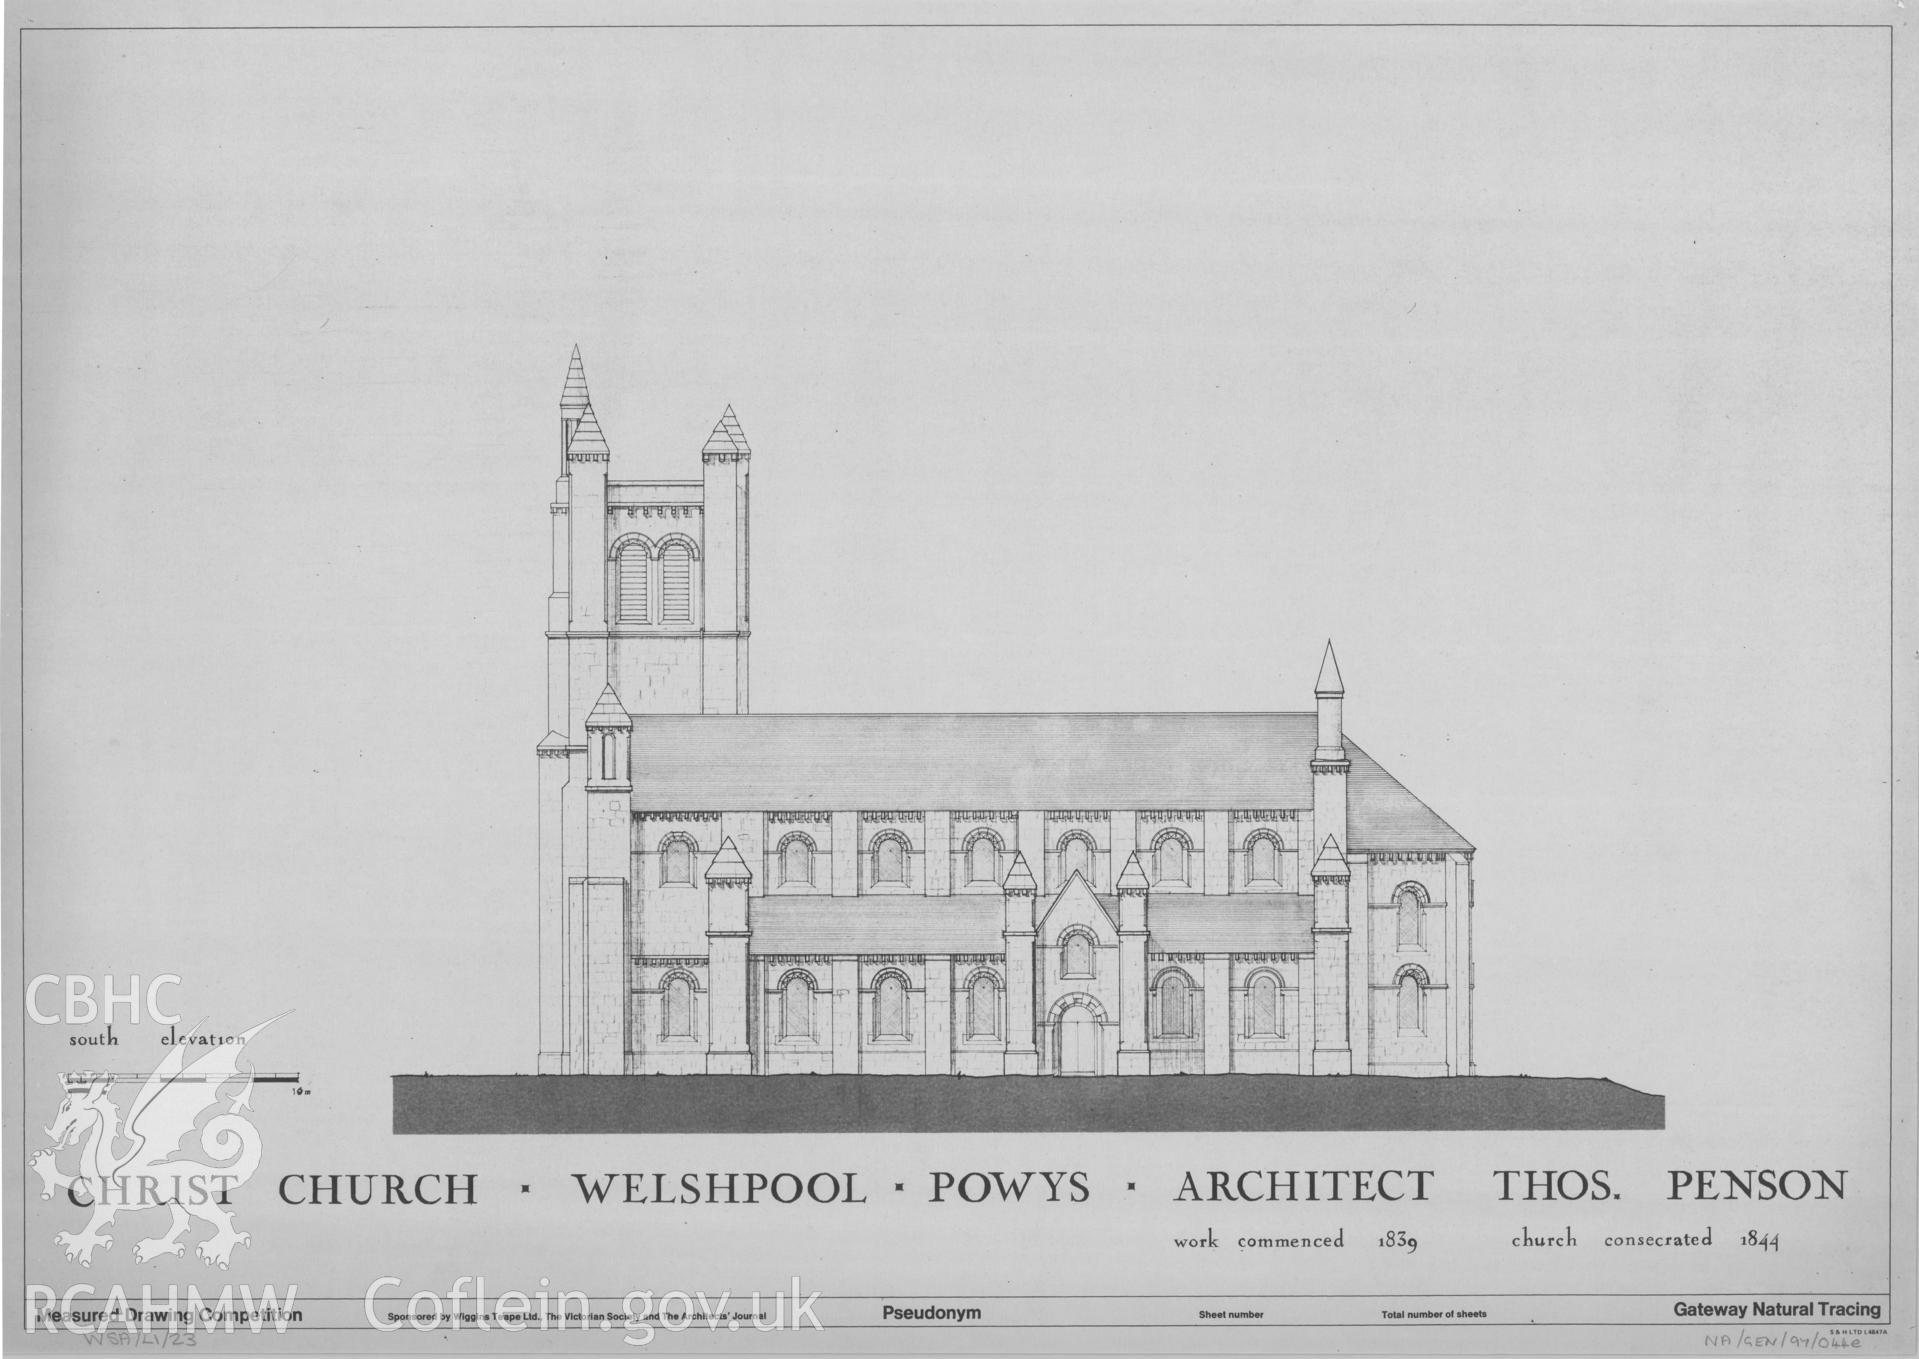 Measured drawing showing south elevation of Christ Church, Welshpool, produced by D. G. Lloyd, I. Rose and G. Usherwood, 1978